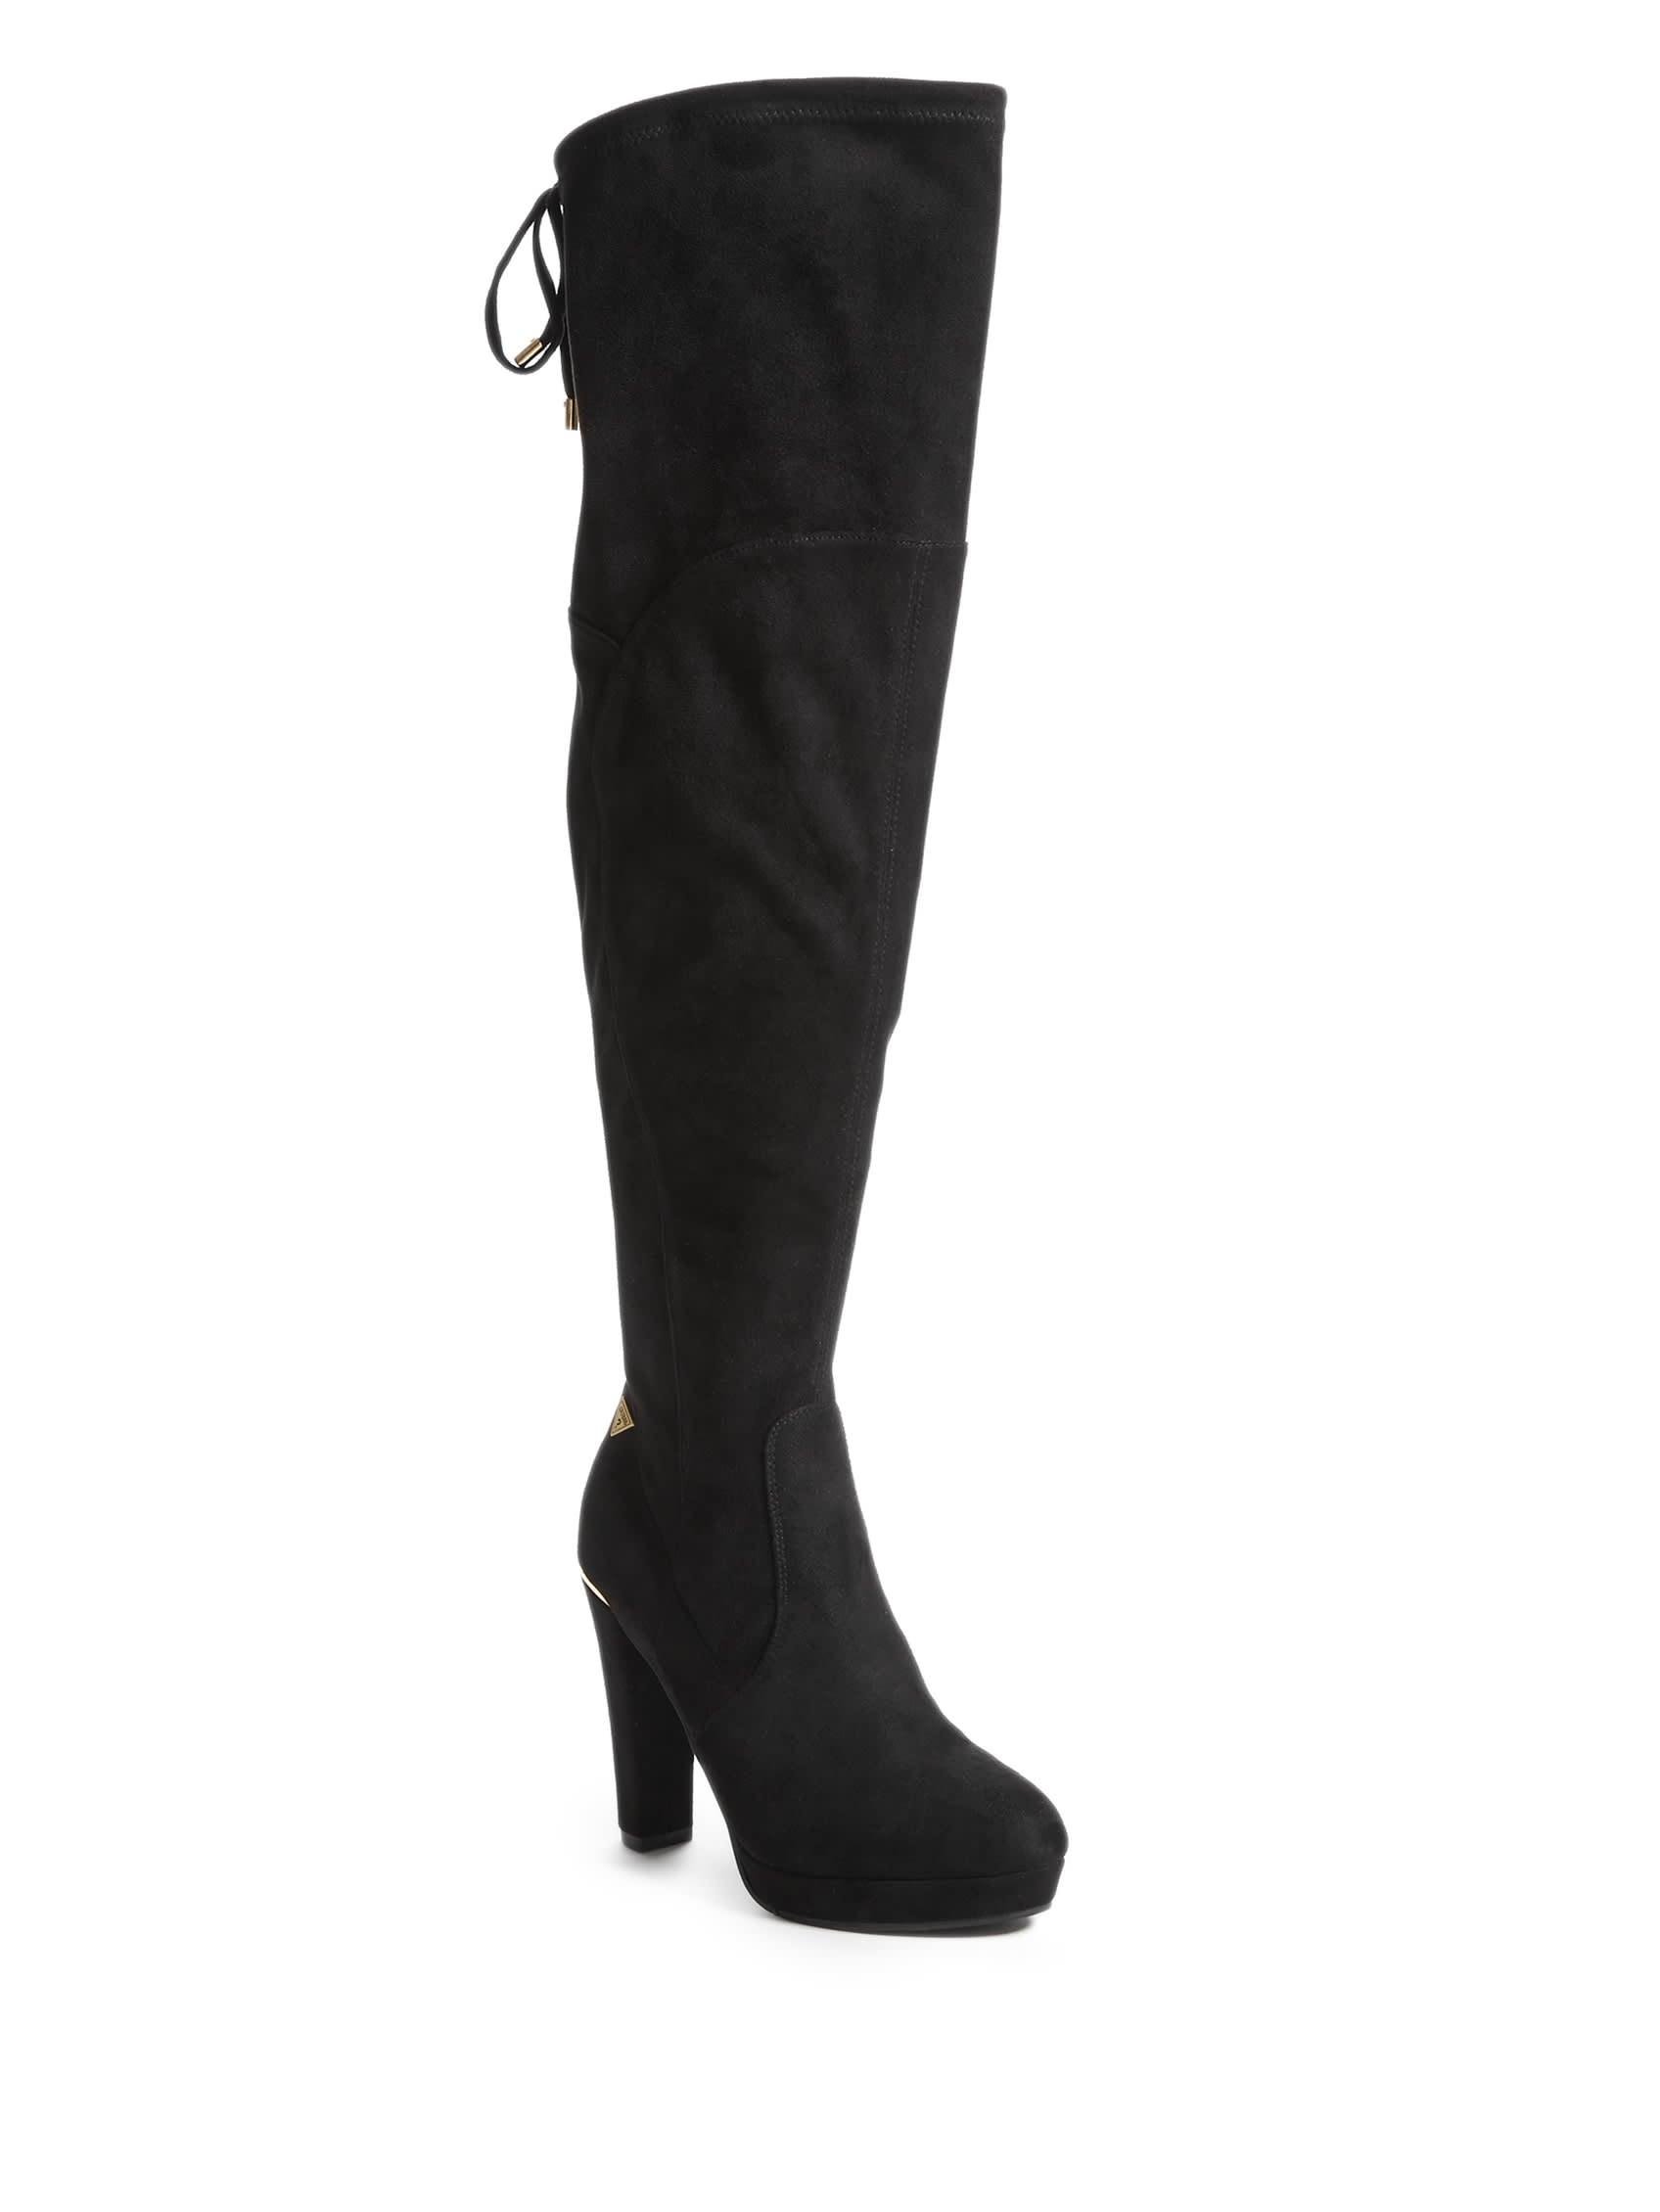 Guess Factory Ladawn Over-the-knee Boots in Black | Lyst